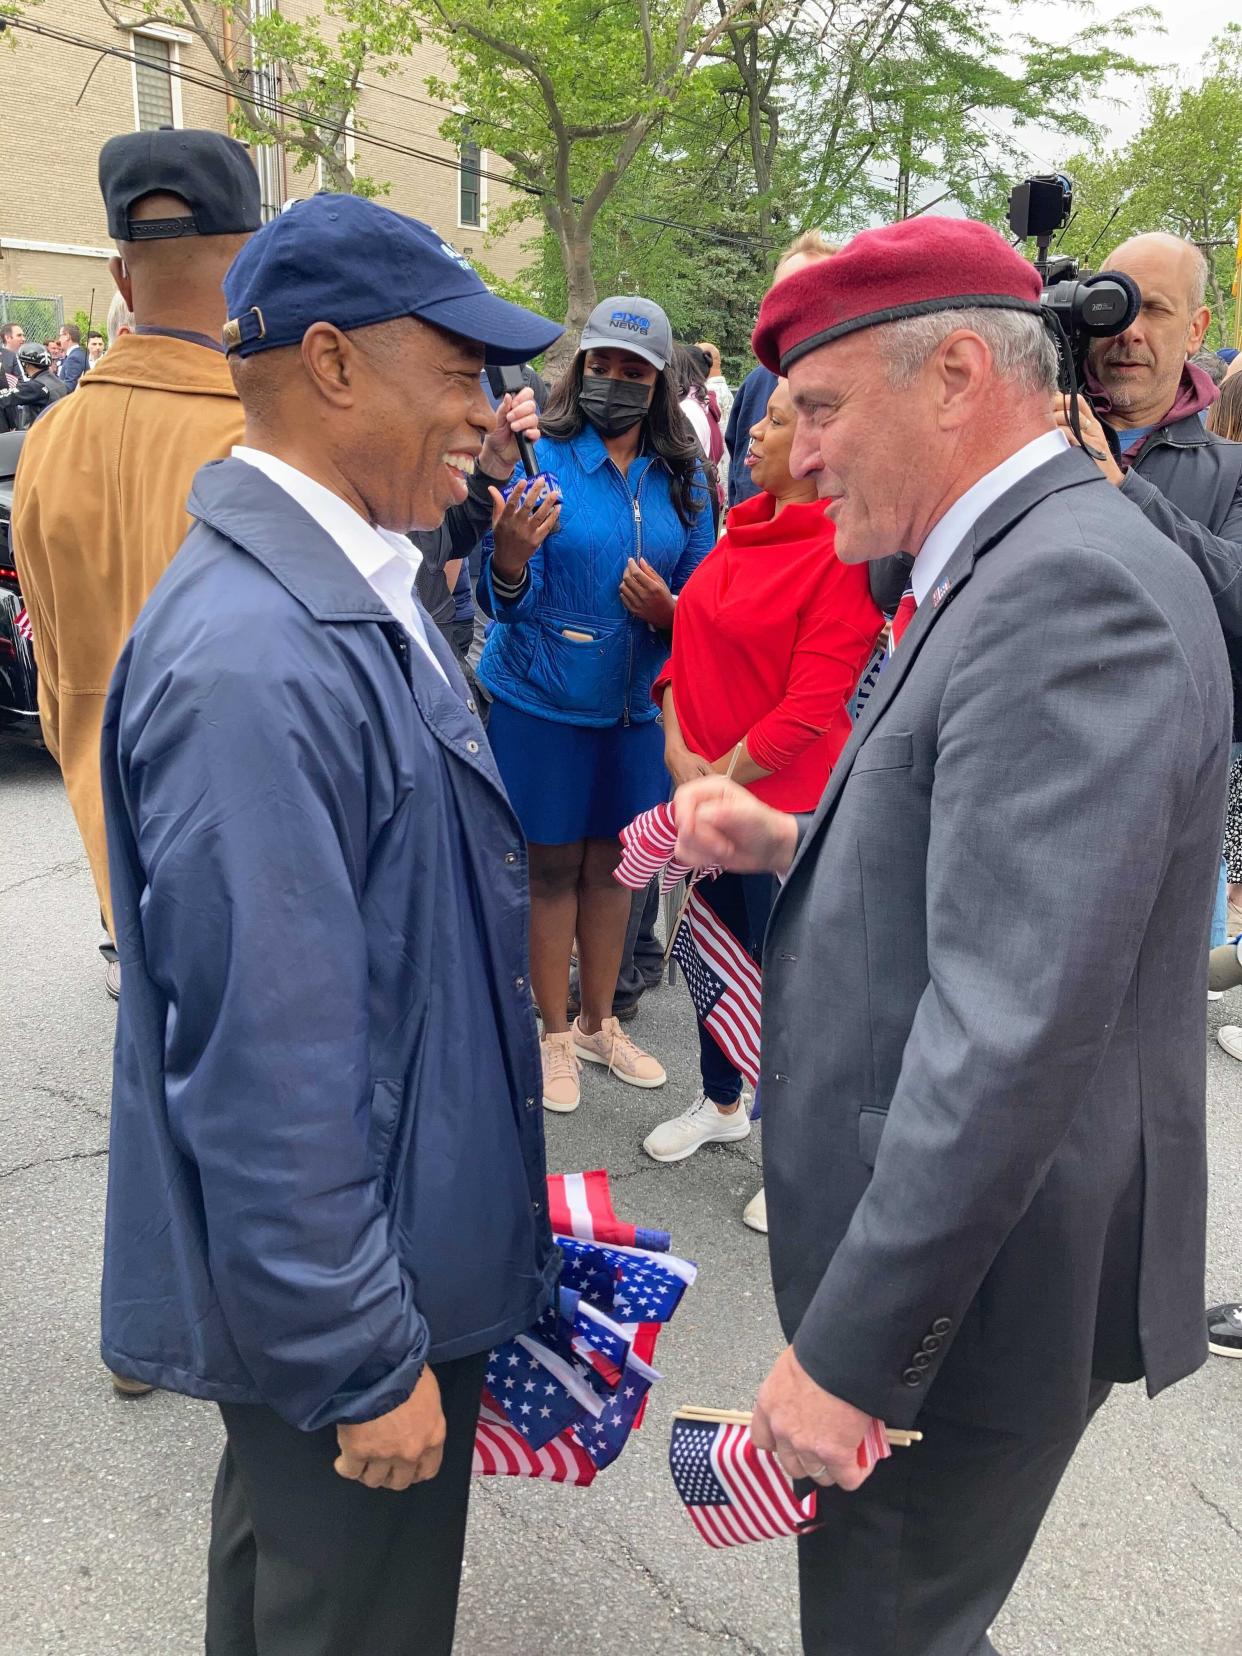 Democratic New York City mayoral candidate Eric Adams (left) and Republican New York City mayoral candidate Curtis Sliwa (right)